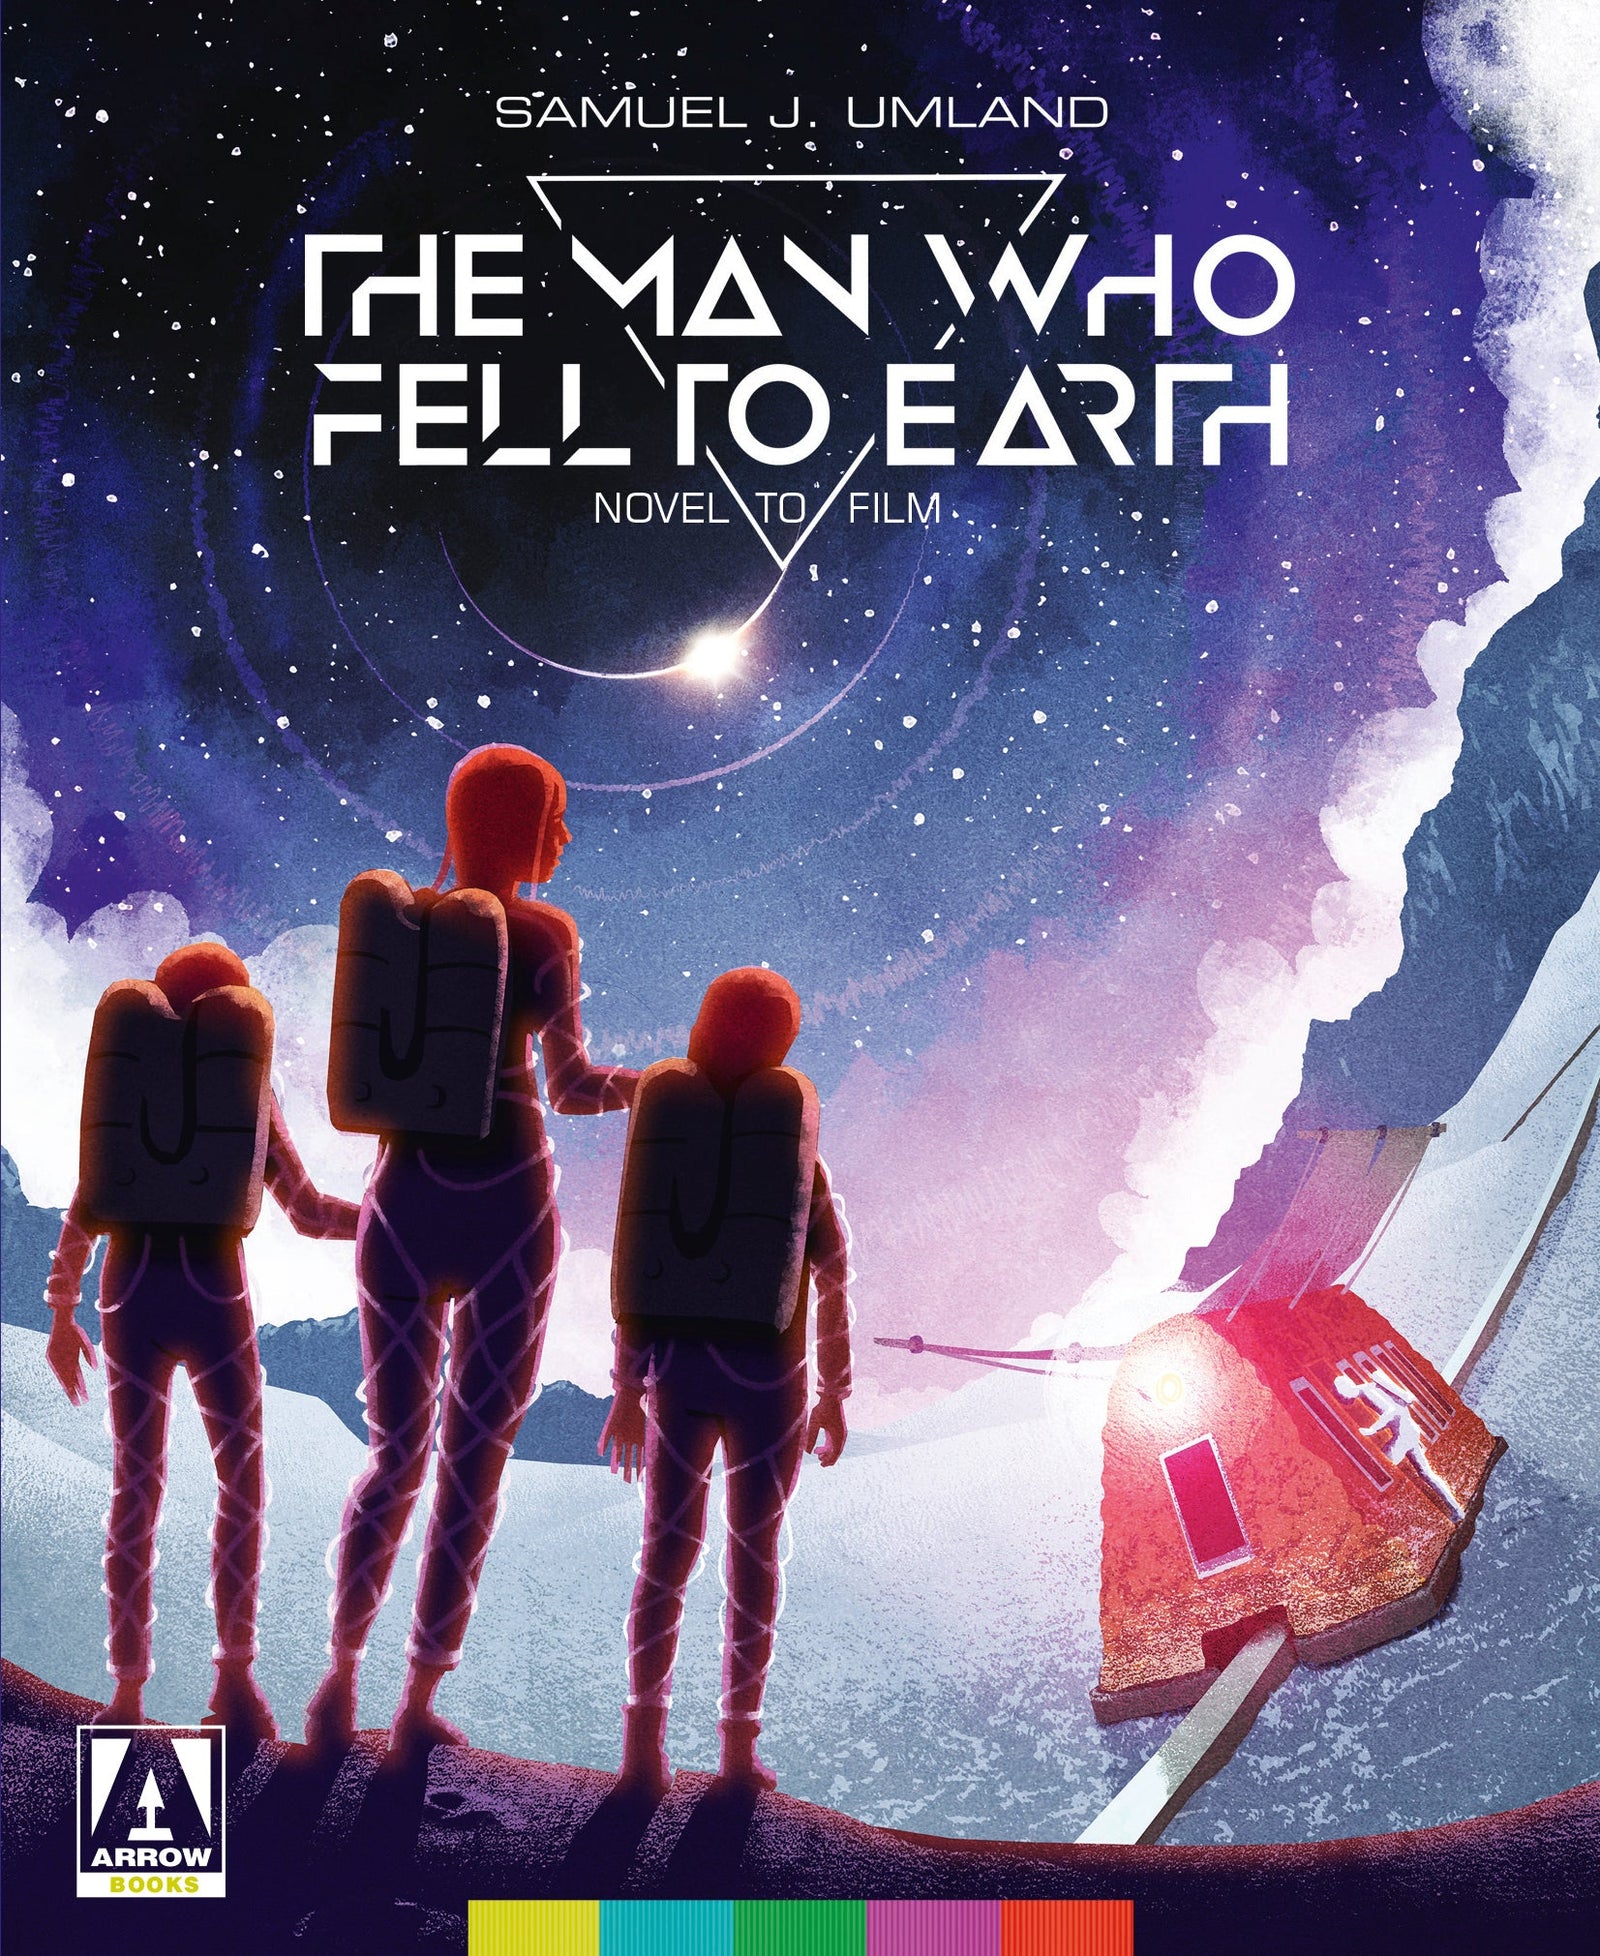 THE MAN WHO FELL TO EARTH BOOK – Grindhouse Video